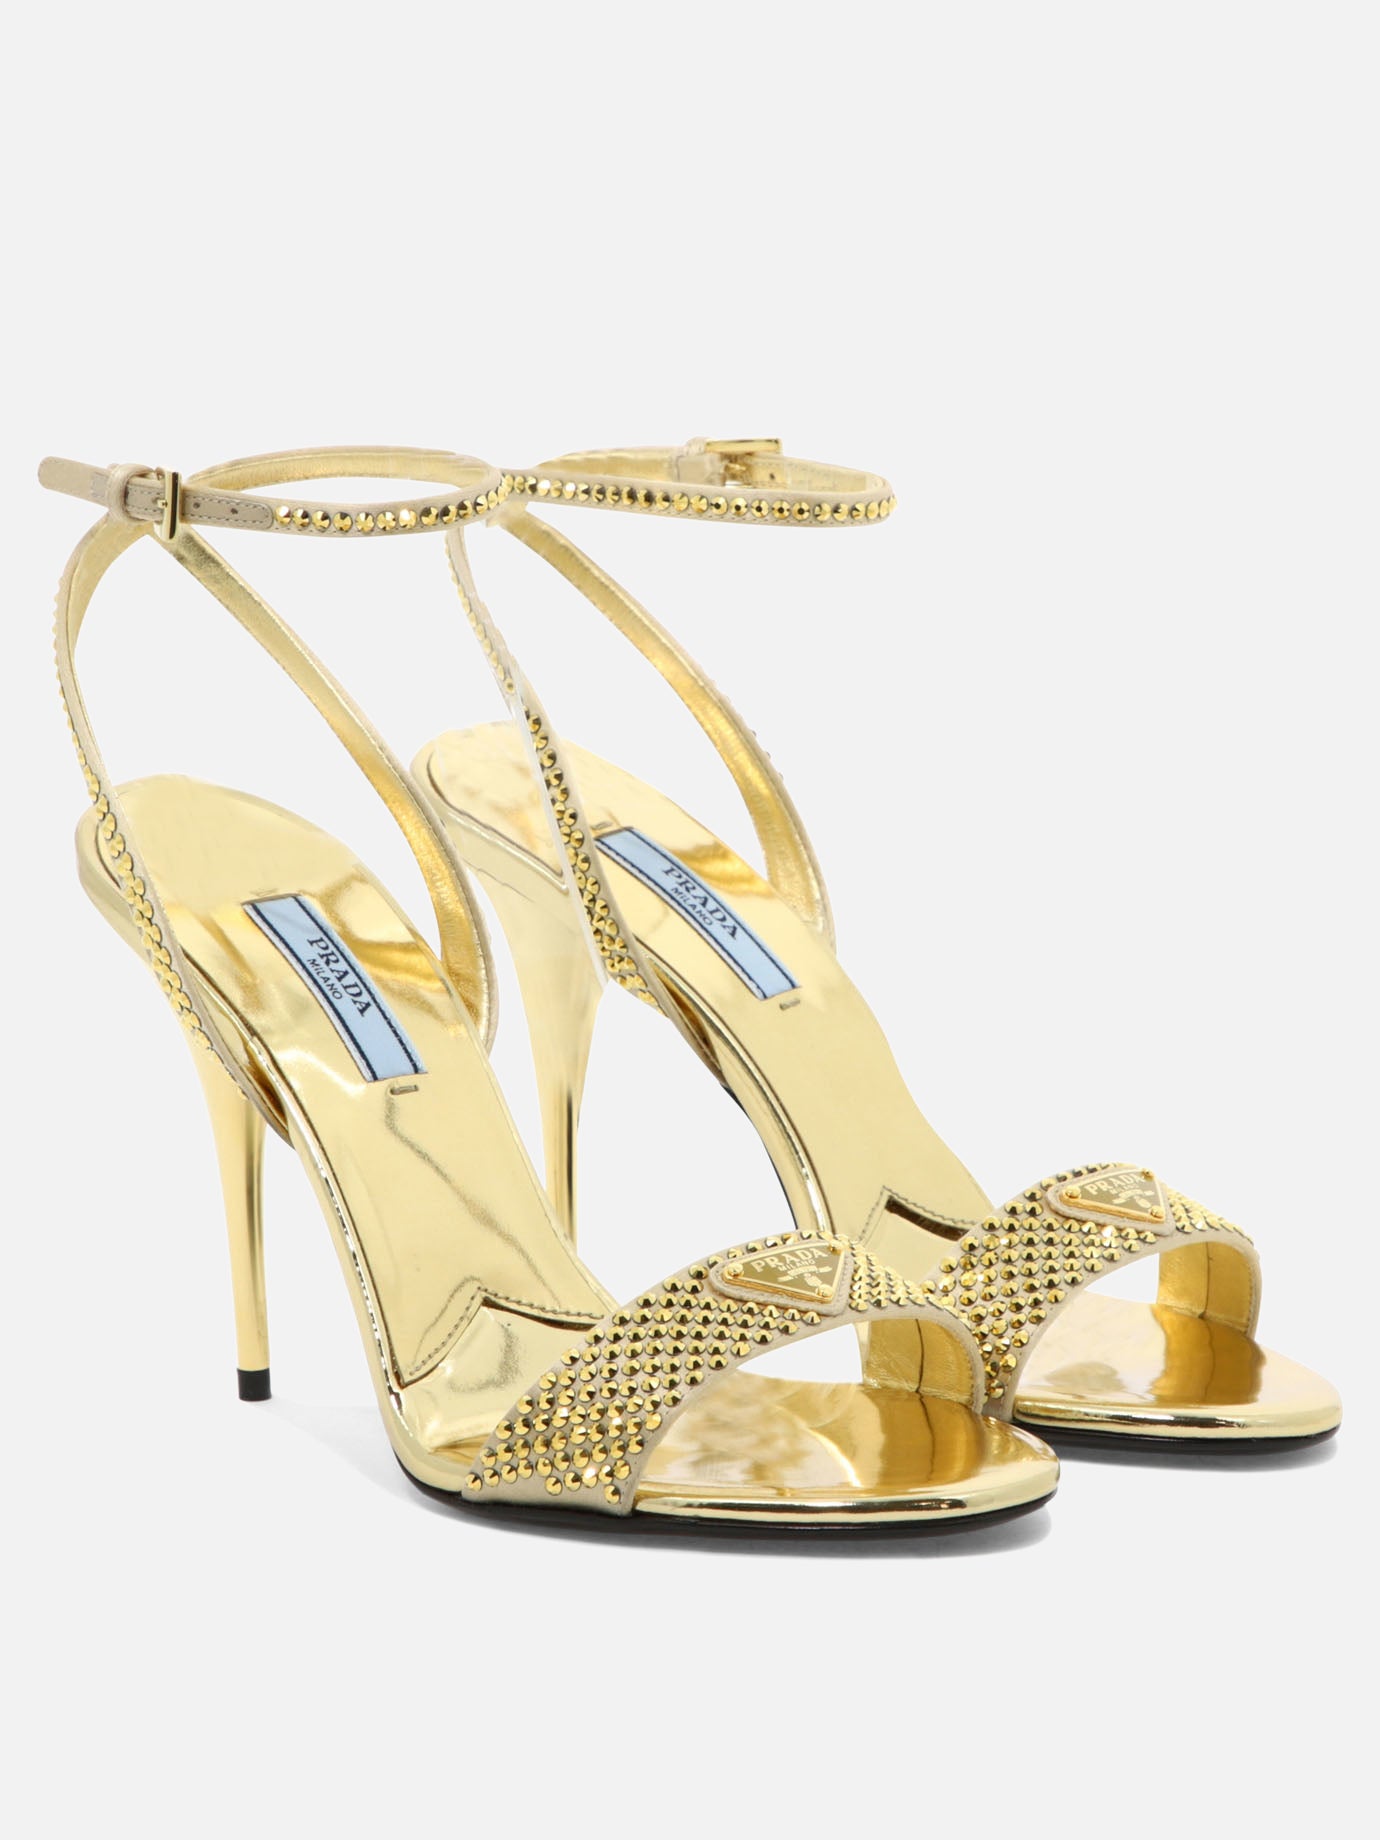 Satin sandals with crystals